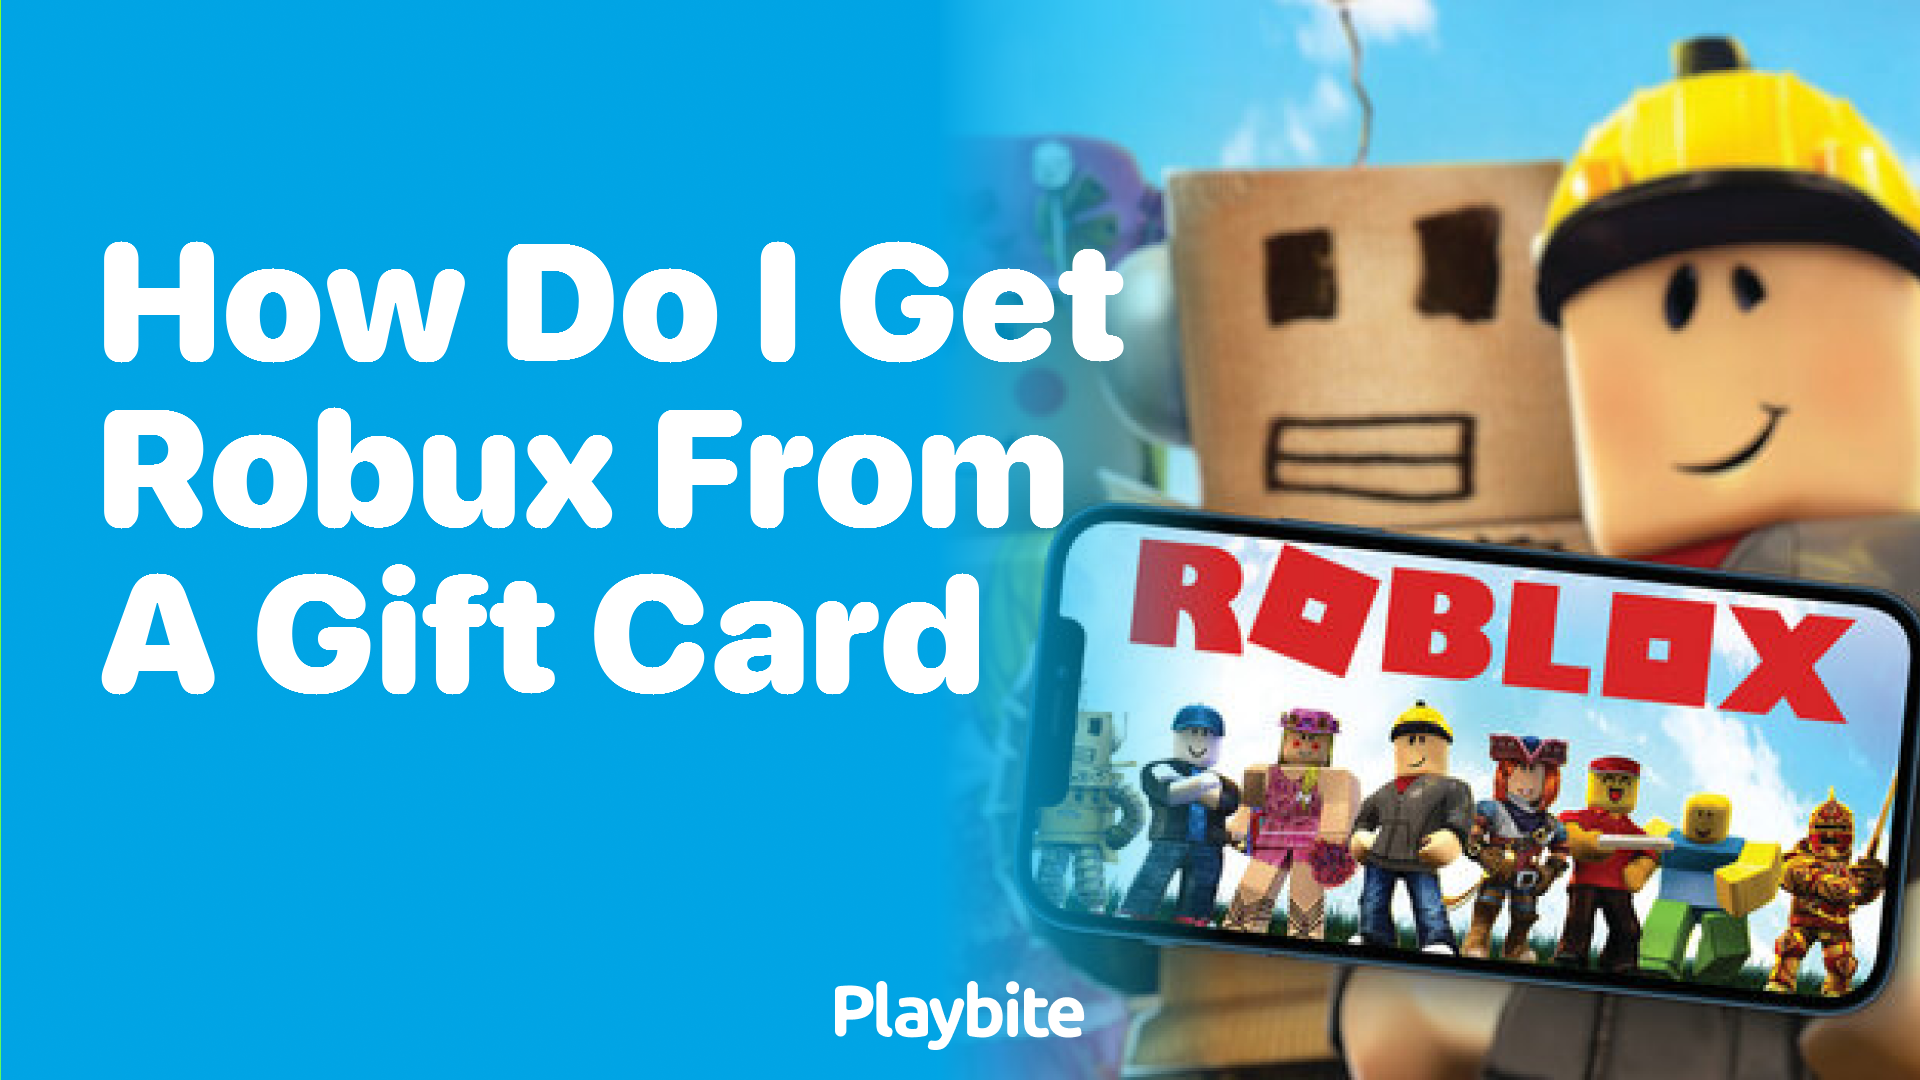 How do I get Robux from a gift card?